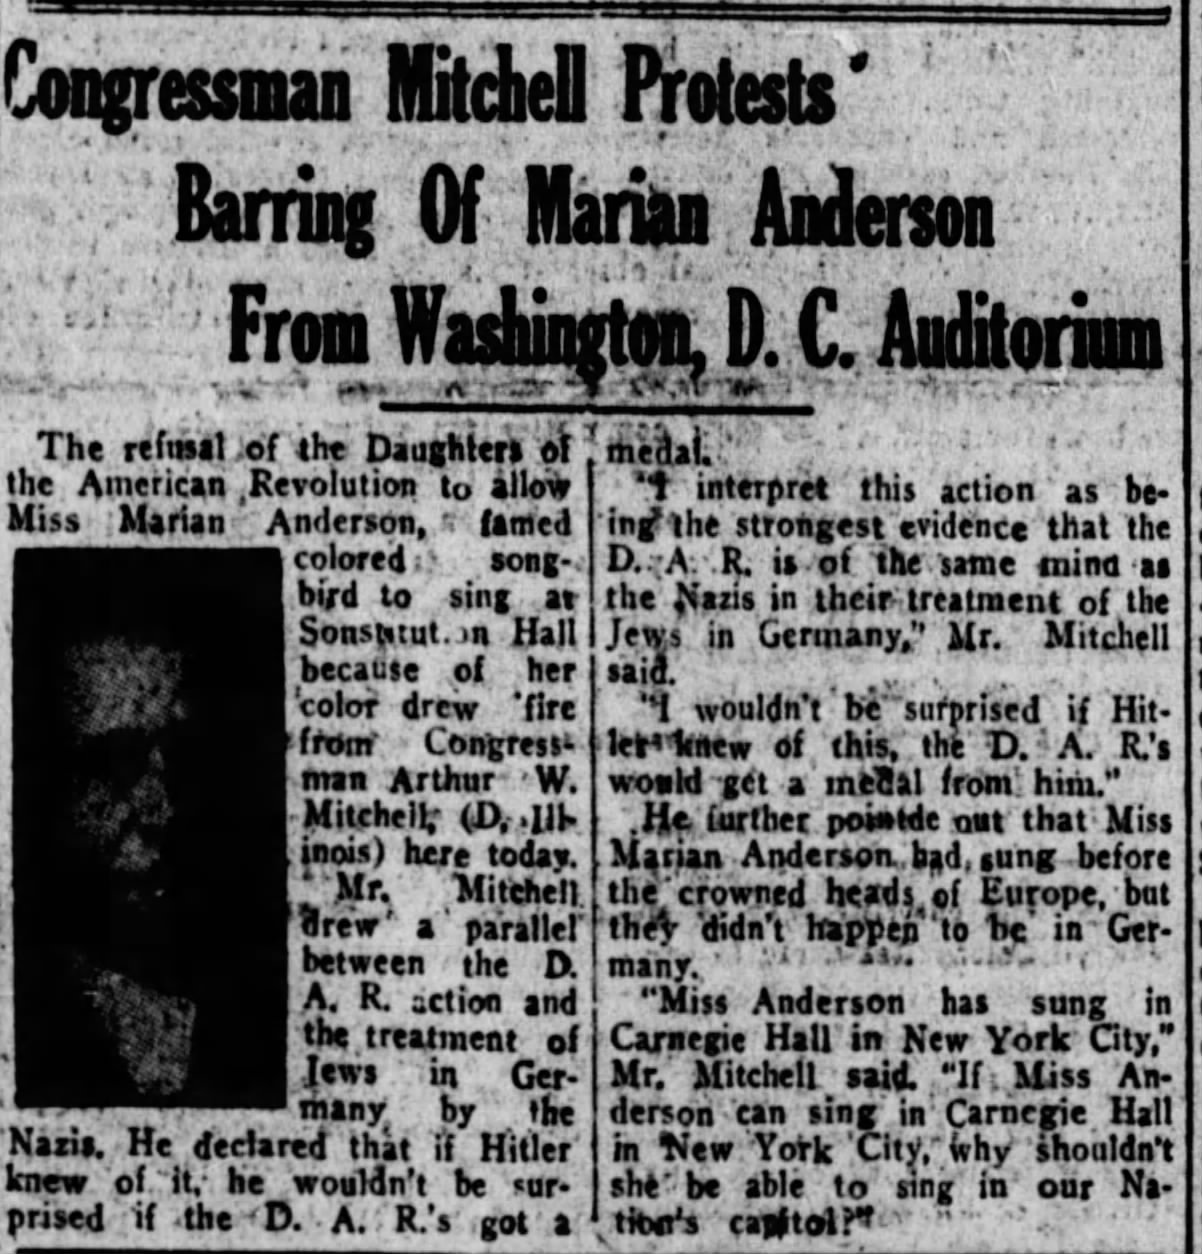 Congressman Mitchell Protests Barring of Marian Anderson From Washington, D.C. Auditorium